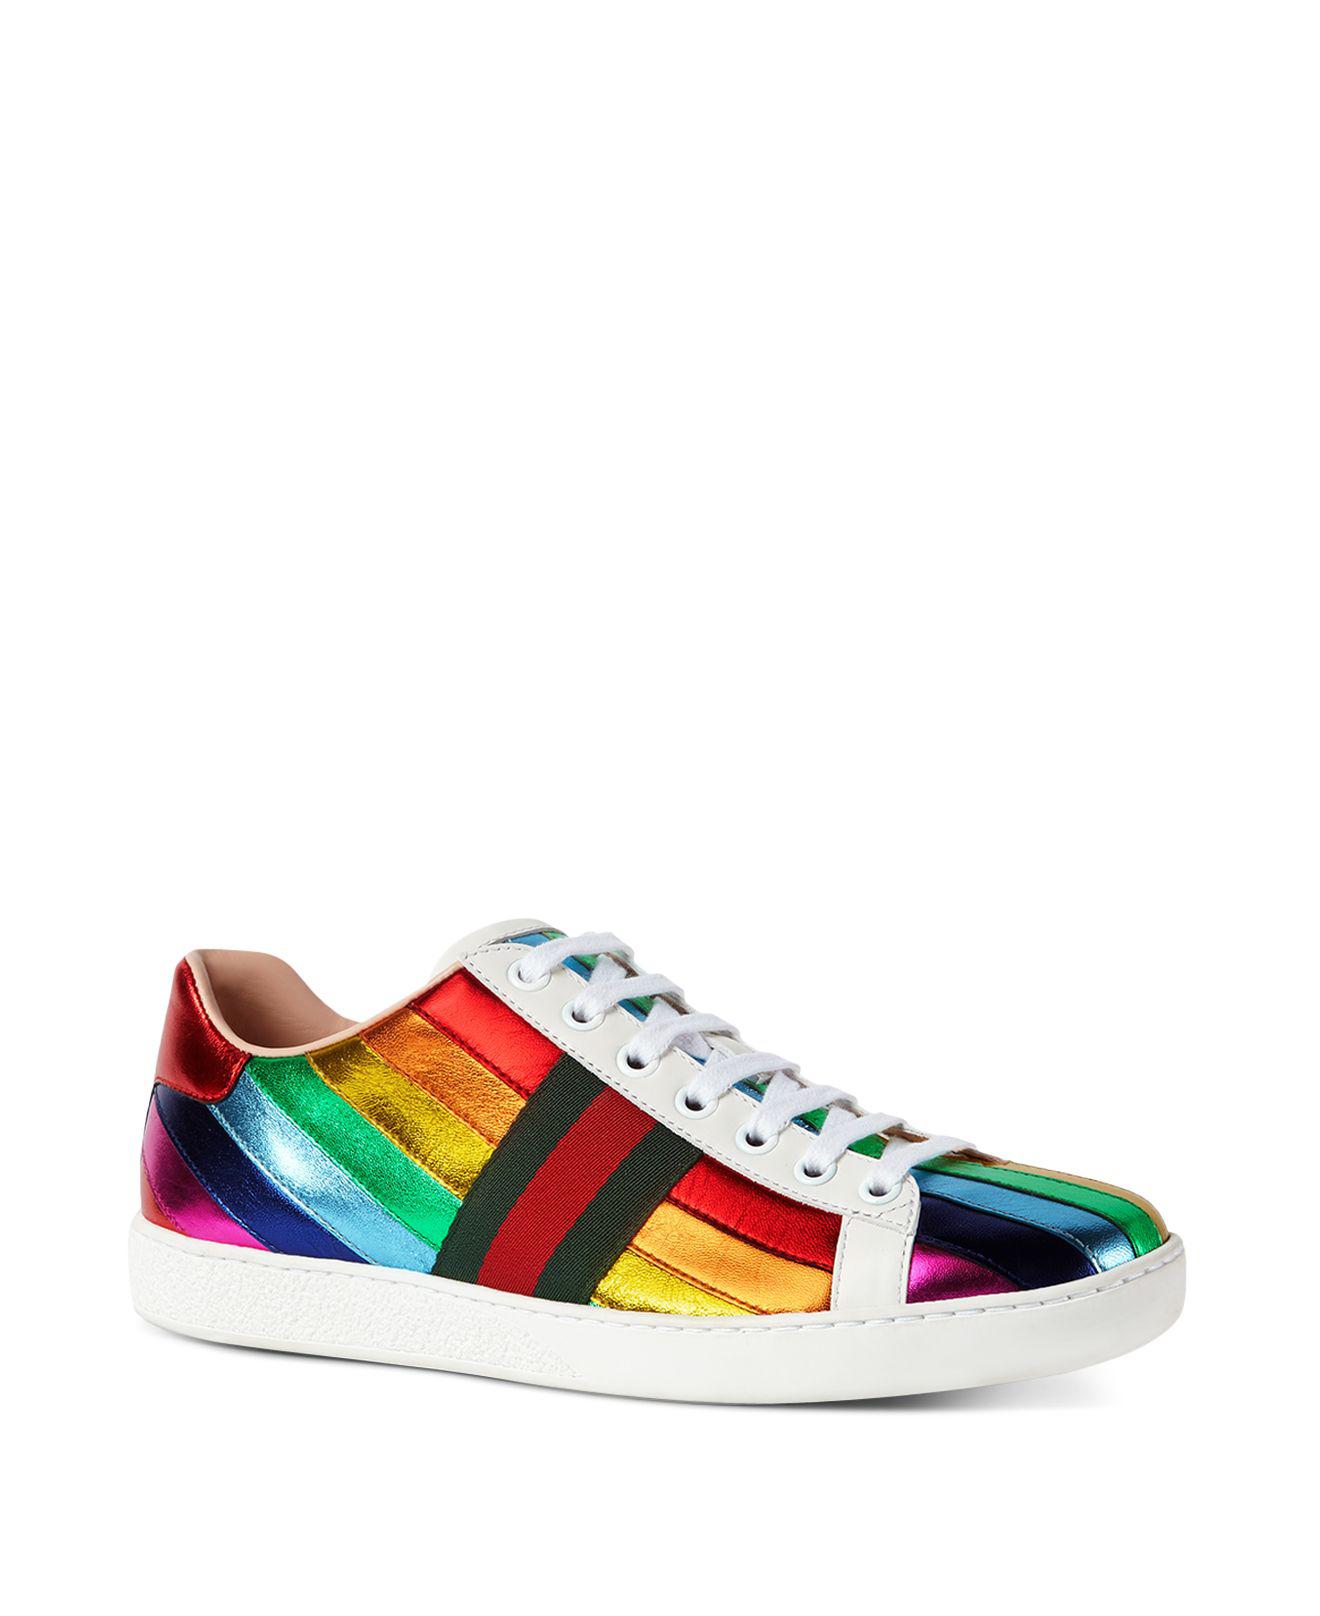 Gucci Metallic Rainbow Stripe Lace Up Sneakers in Red | Lyst